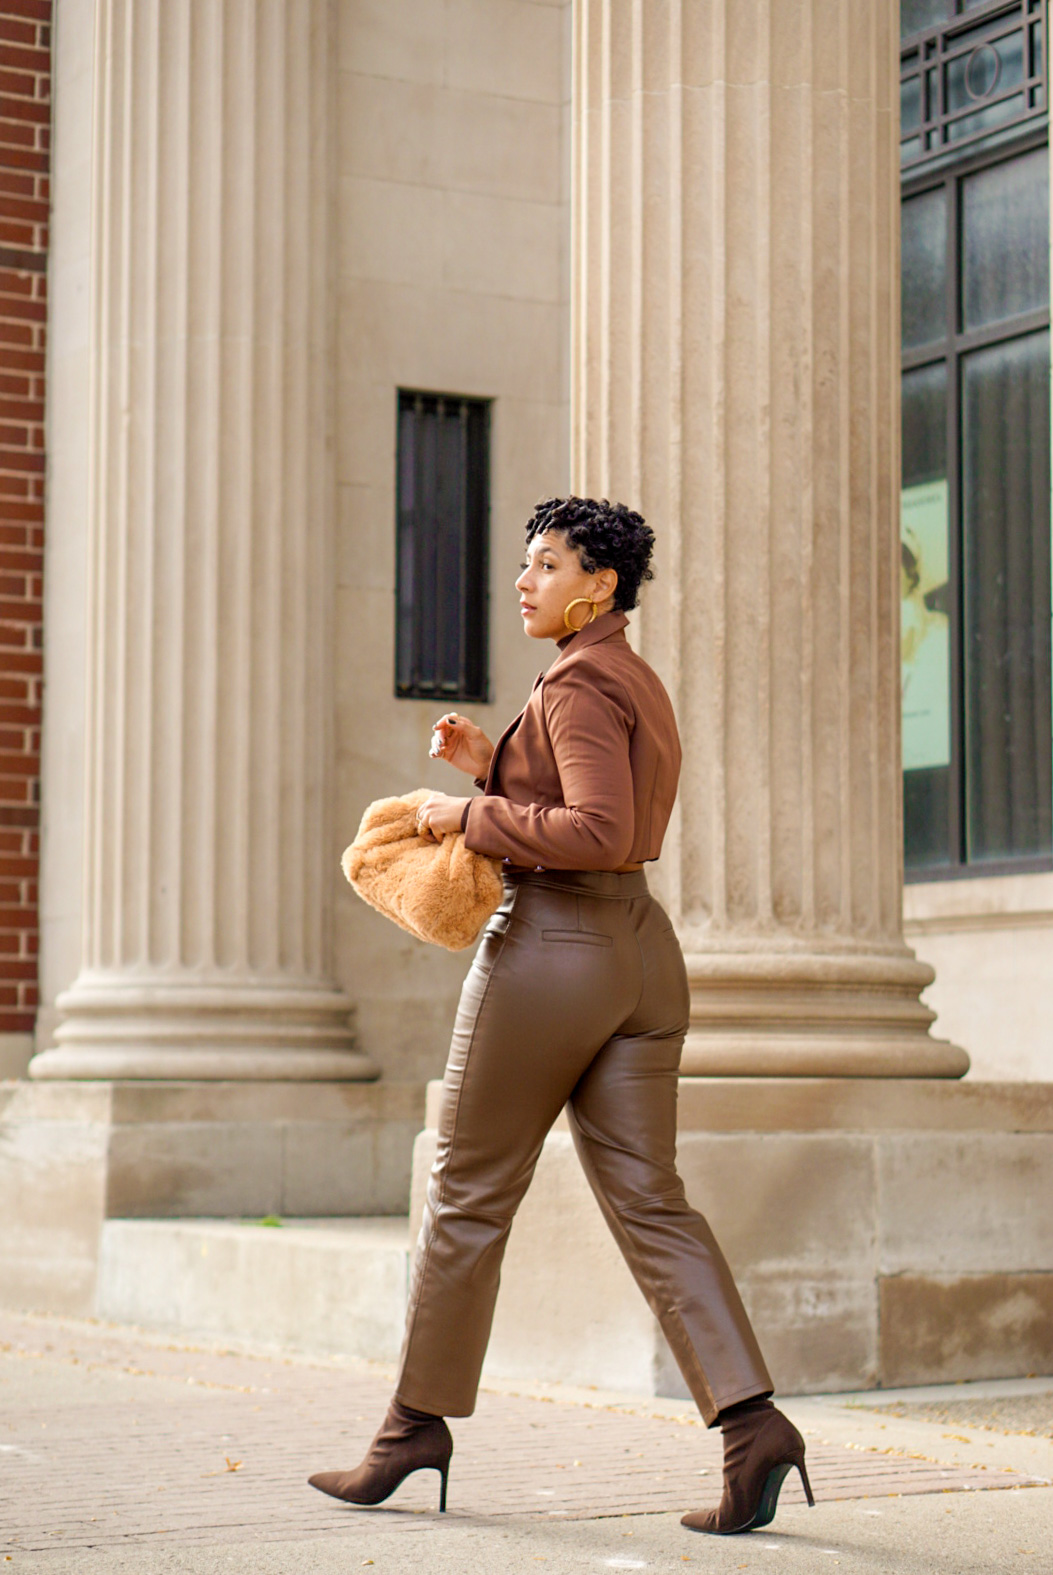 black friday sales 2021, brown monochrome outfit idea, baddie outfit, fall fits black girl